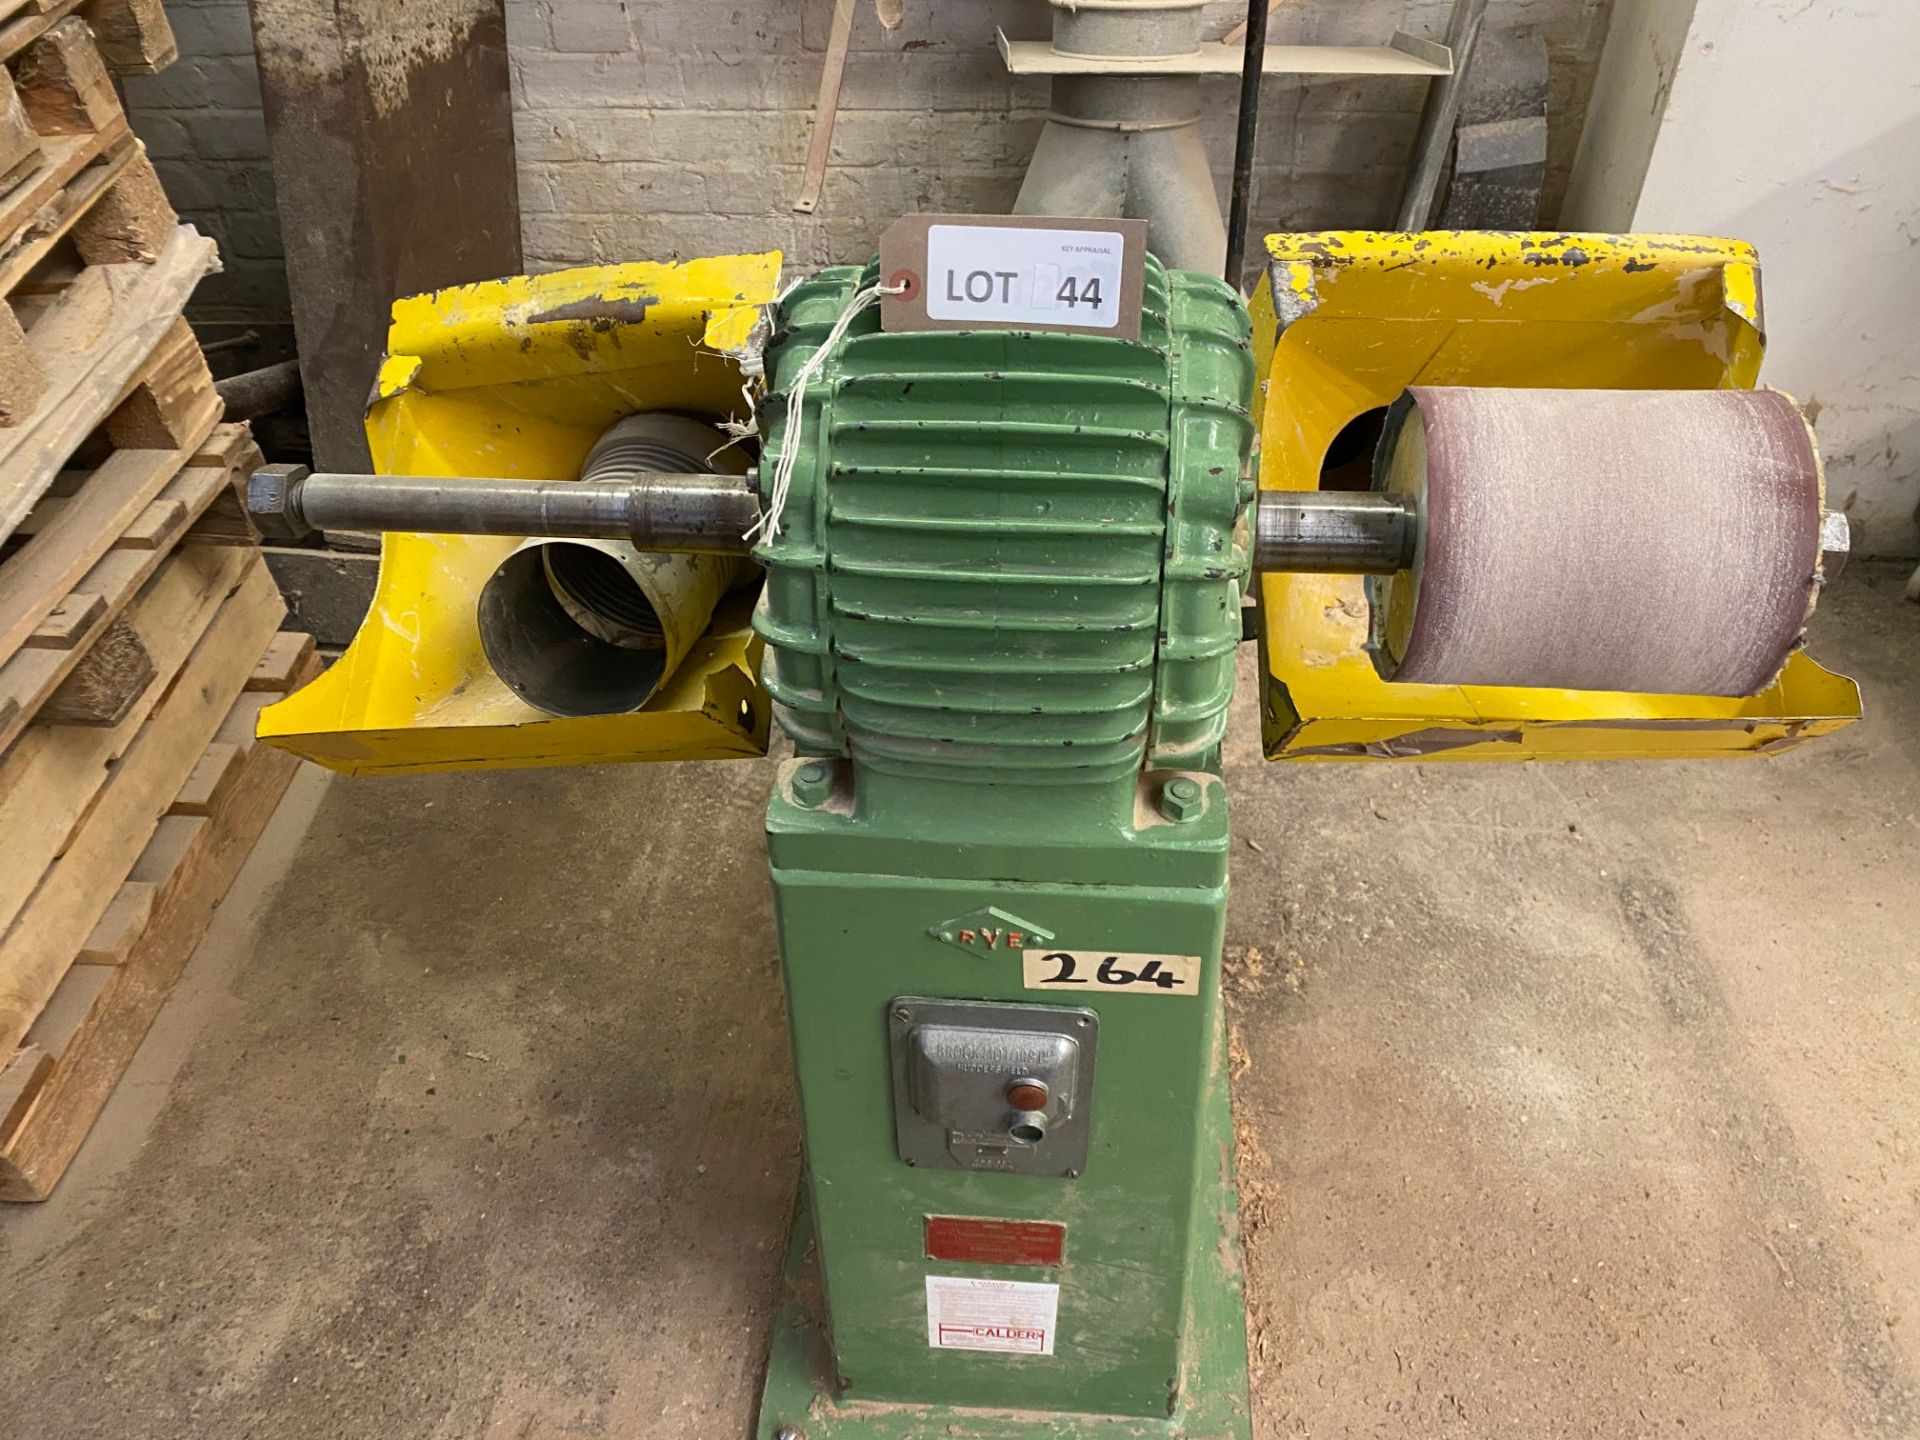 Rye FDS1 twin-head pedestal linisher, serial no: 265 (no drums)